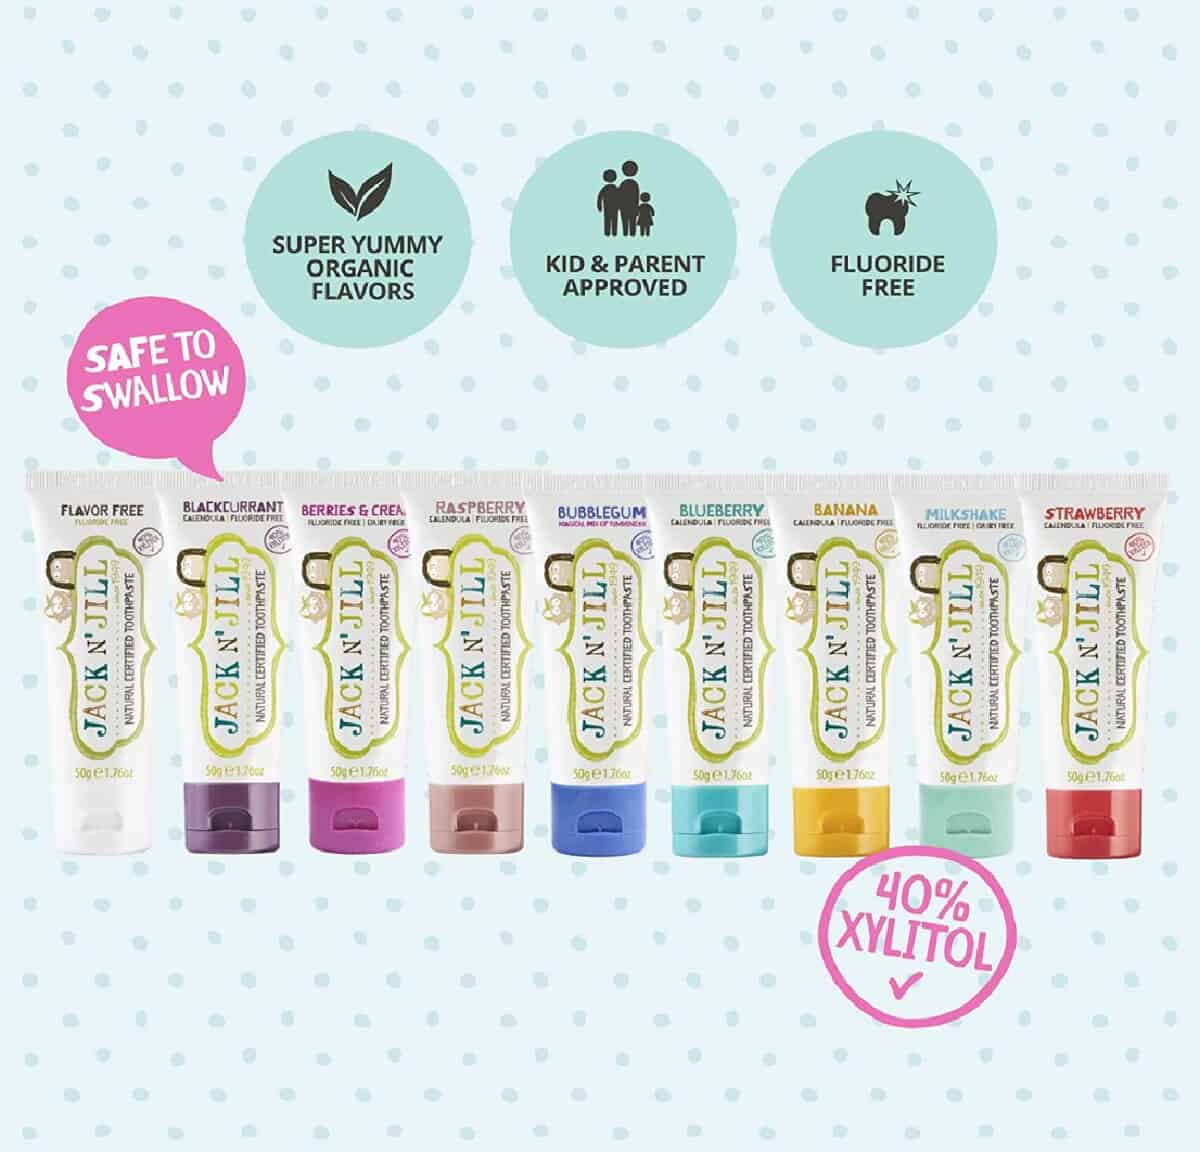 Nine tubes of colorful Jack N Jill toothpaste in nine different flavors against a green and white polka dot background. 